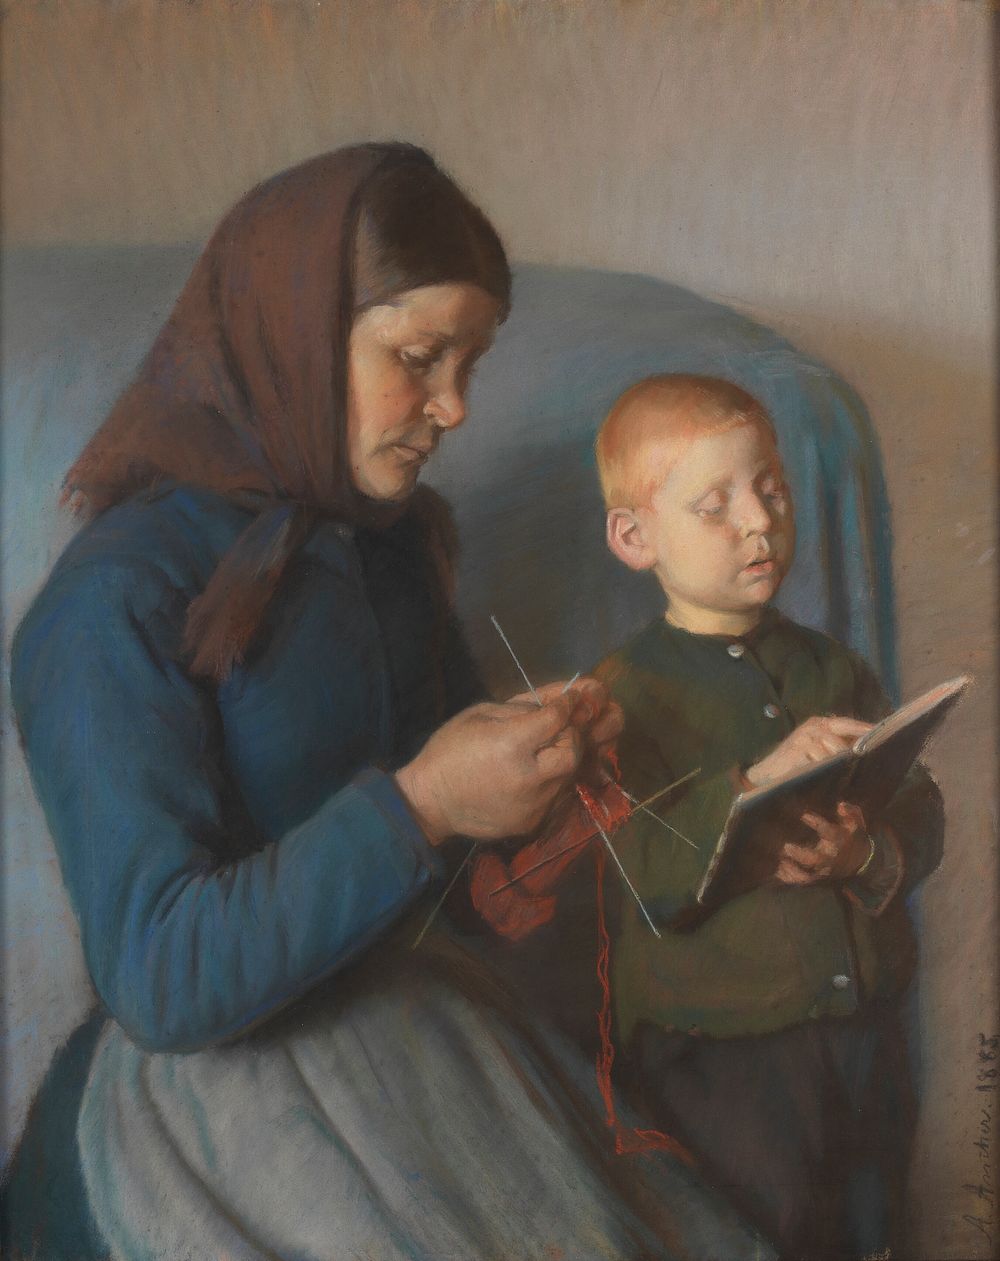 The lesson is reviewed by Anna Ancher